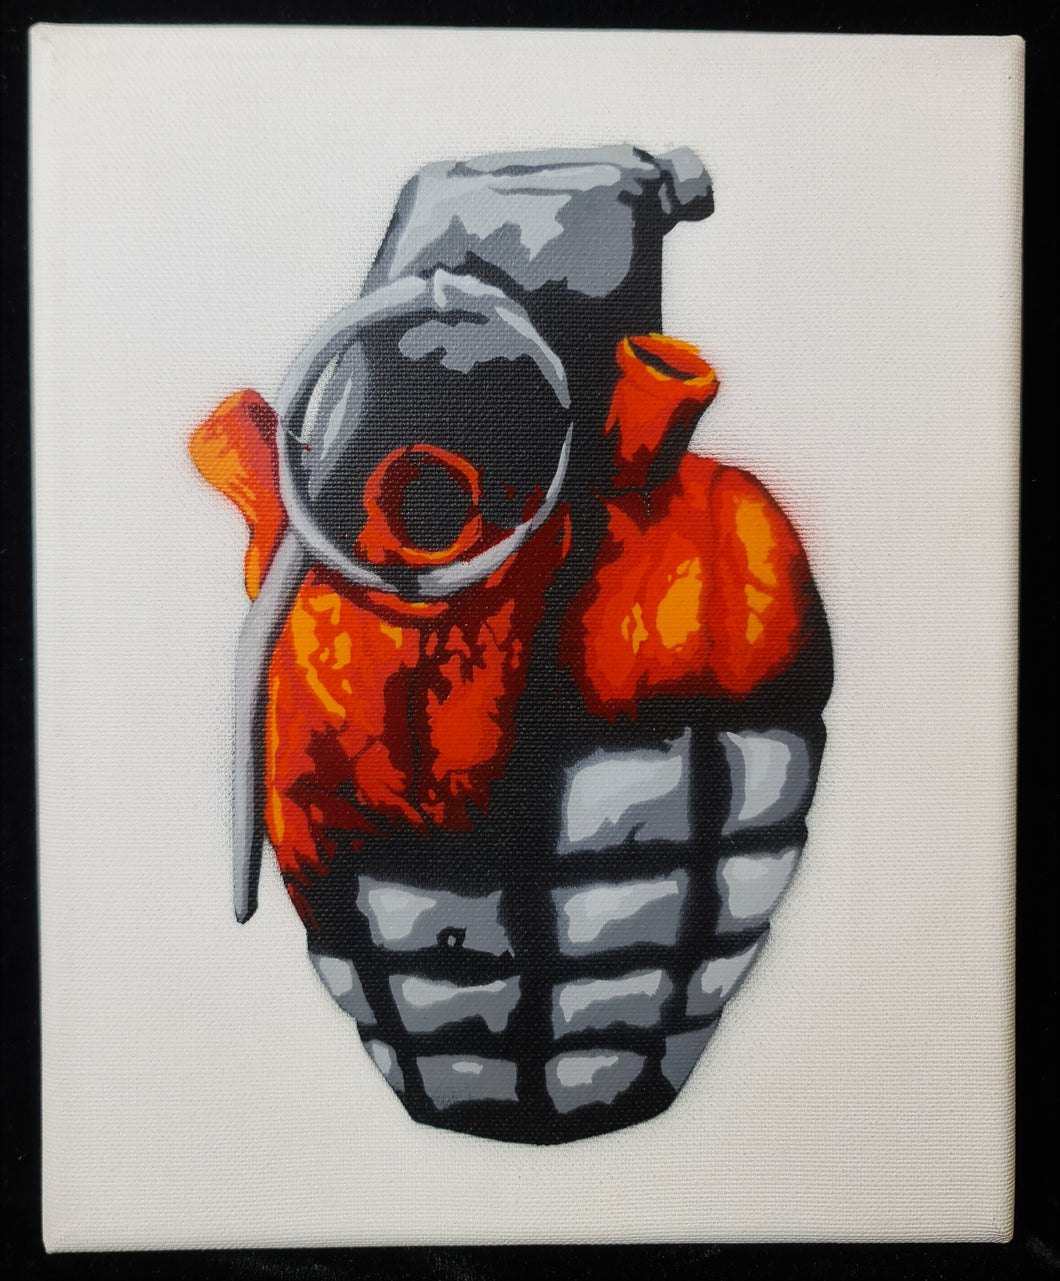 MARTIN WHATSON Heart Grenade 2013 - Painting on canvas